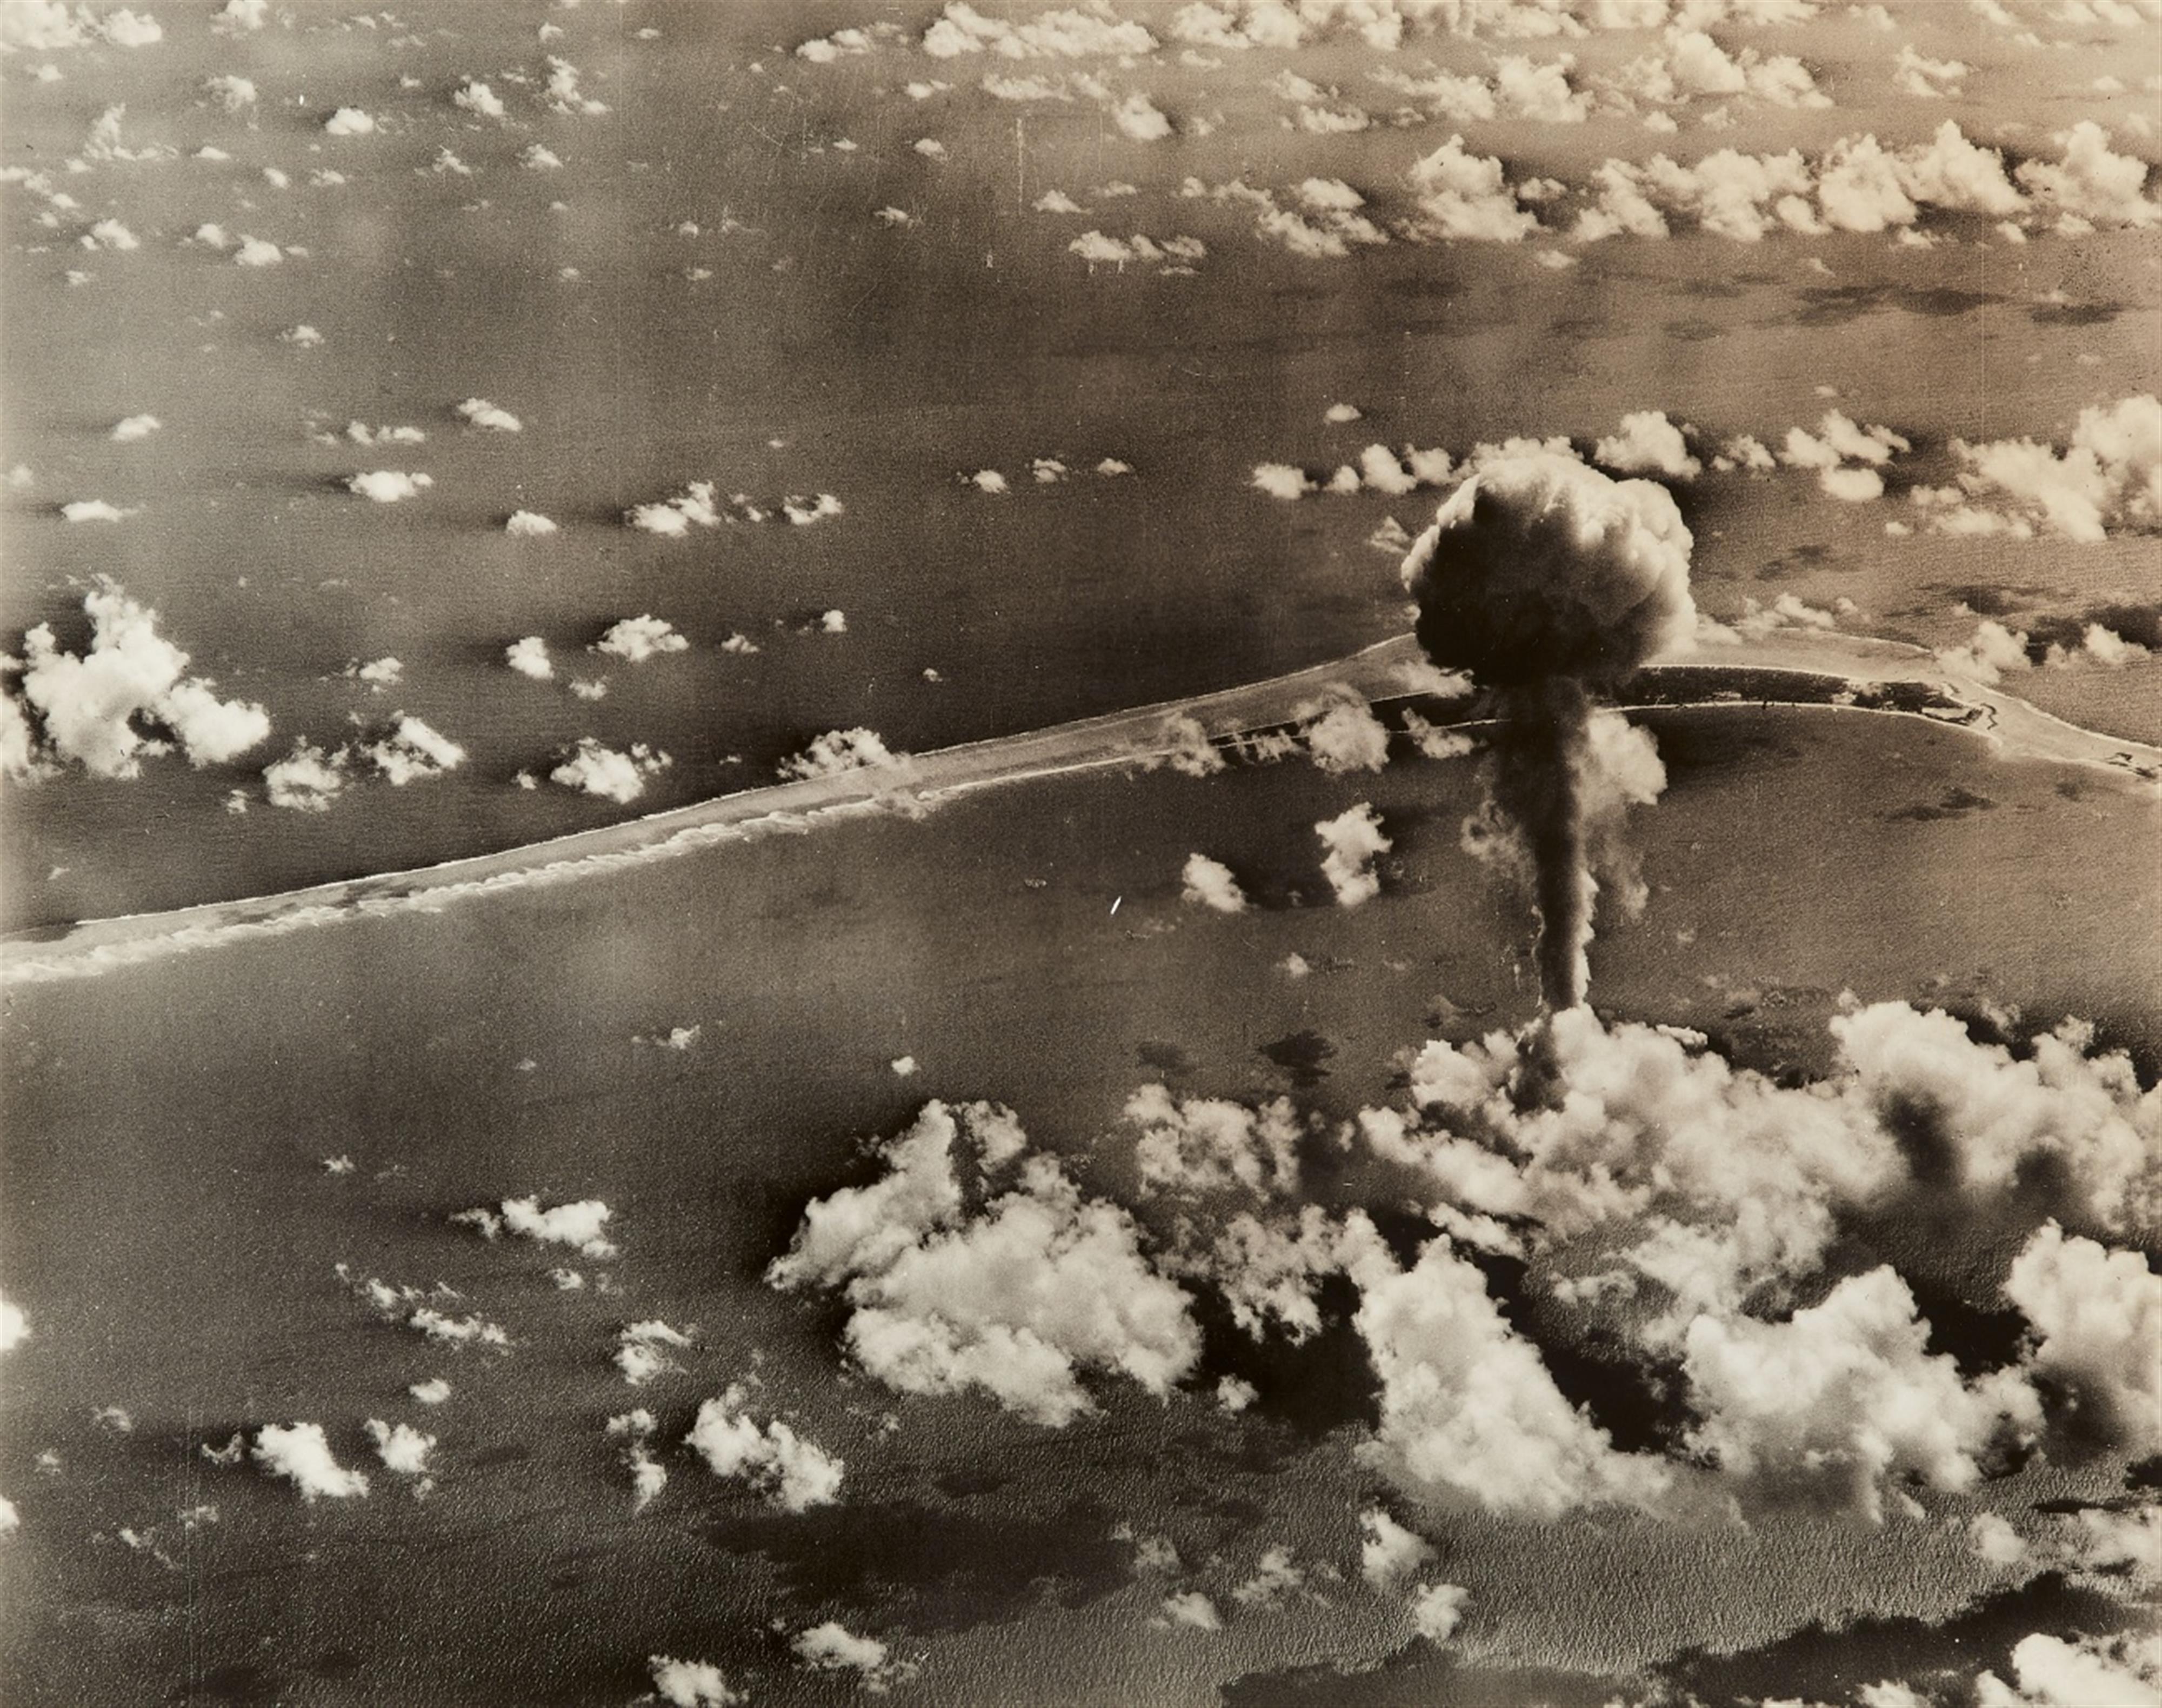 Joint Army Task Force One Photo - "Operation Crossroads" - Views of the Bikini Atoll nuclear Tests - image-7